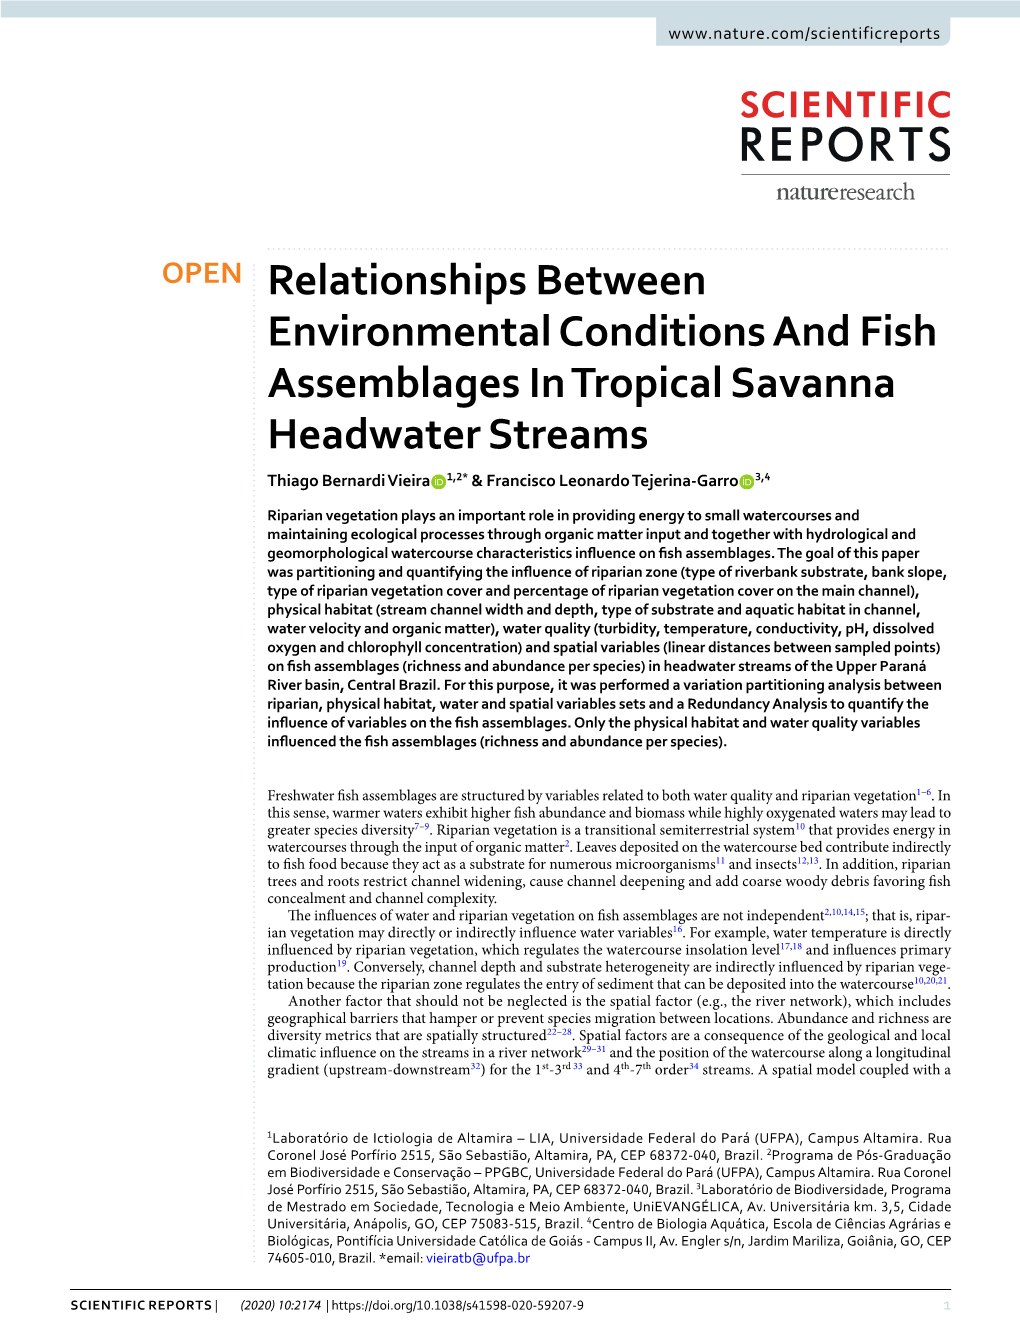 Relationships Between Environmental Conditions and Fish Assemblages in Tropical Savanna Headwater Streams